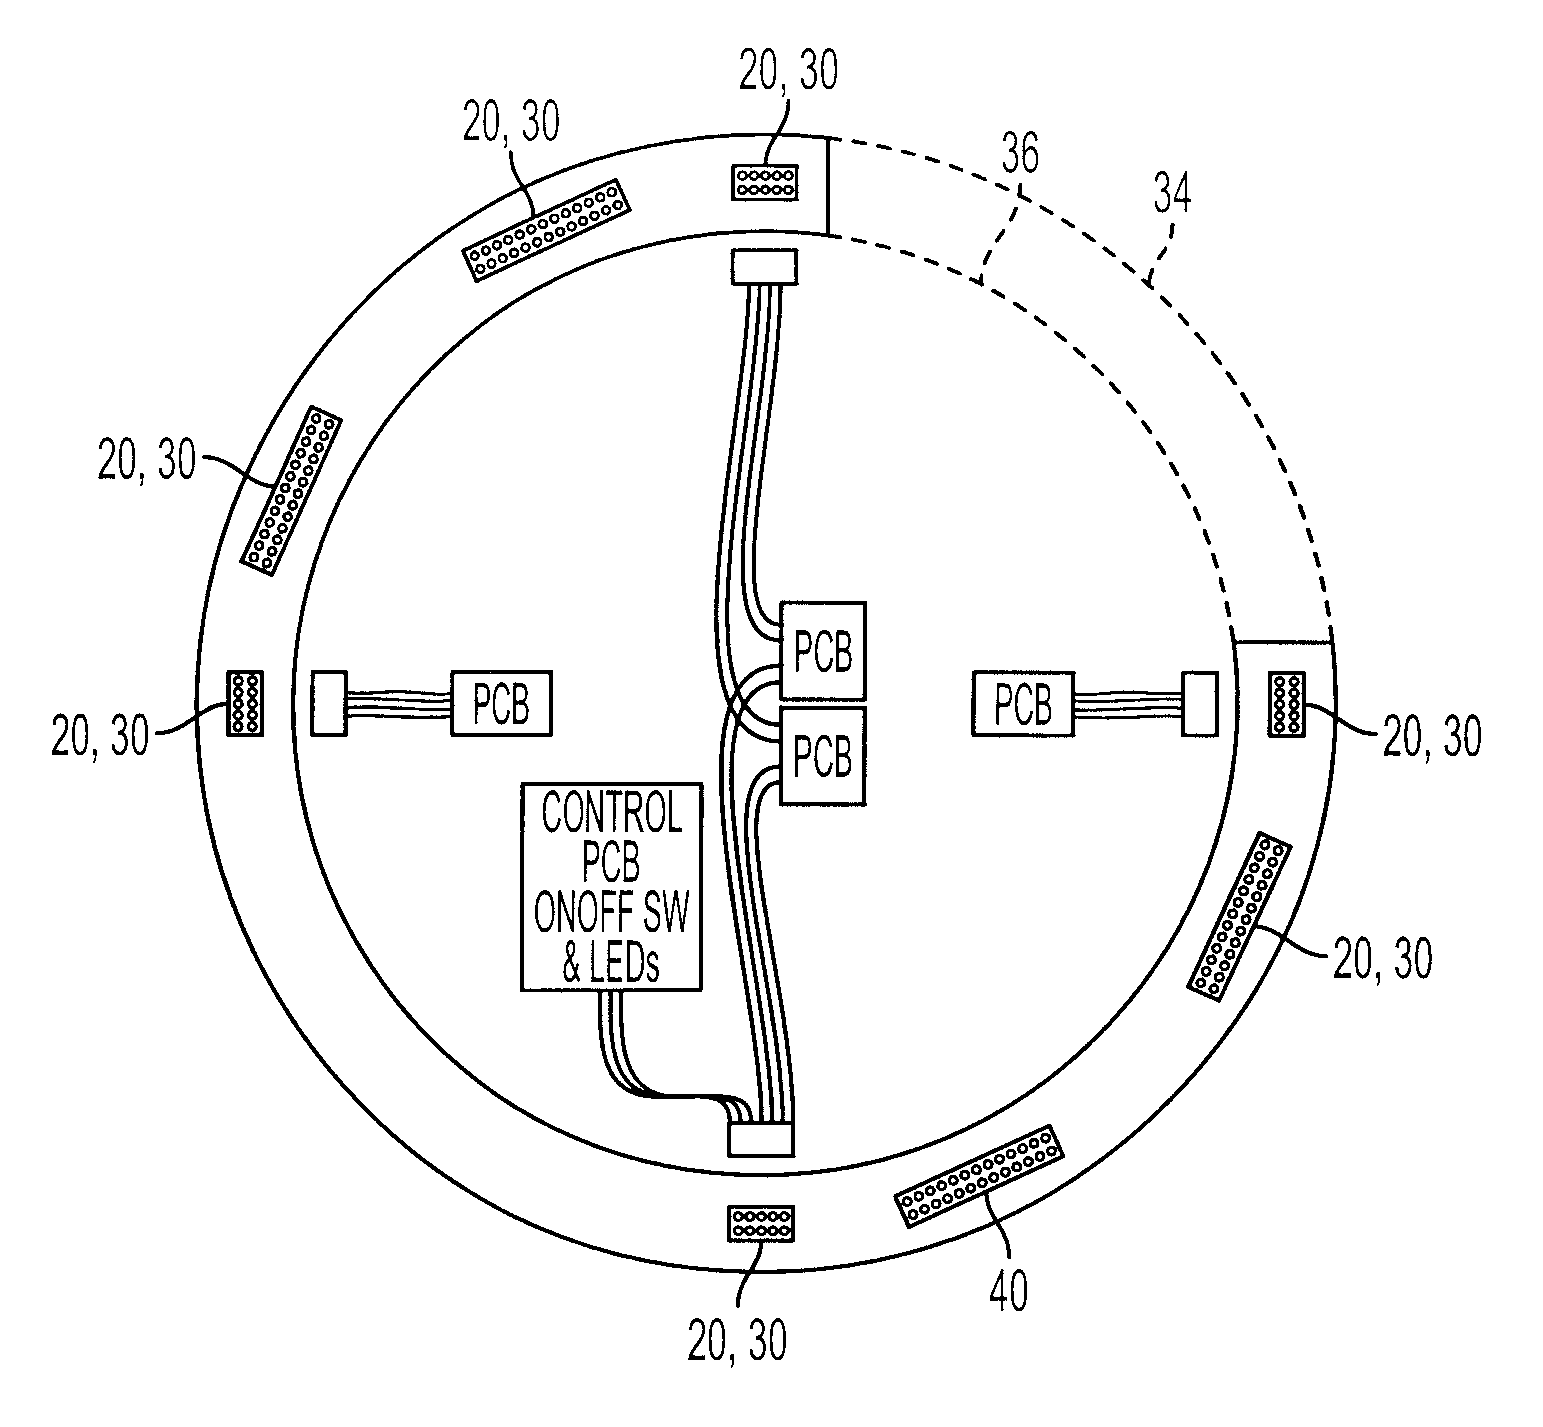 Structural ring interconnect printed circuit board assembly for a ducted fan unmanned aerial vehicle